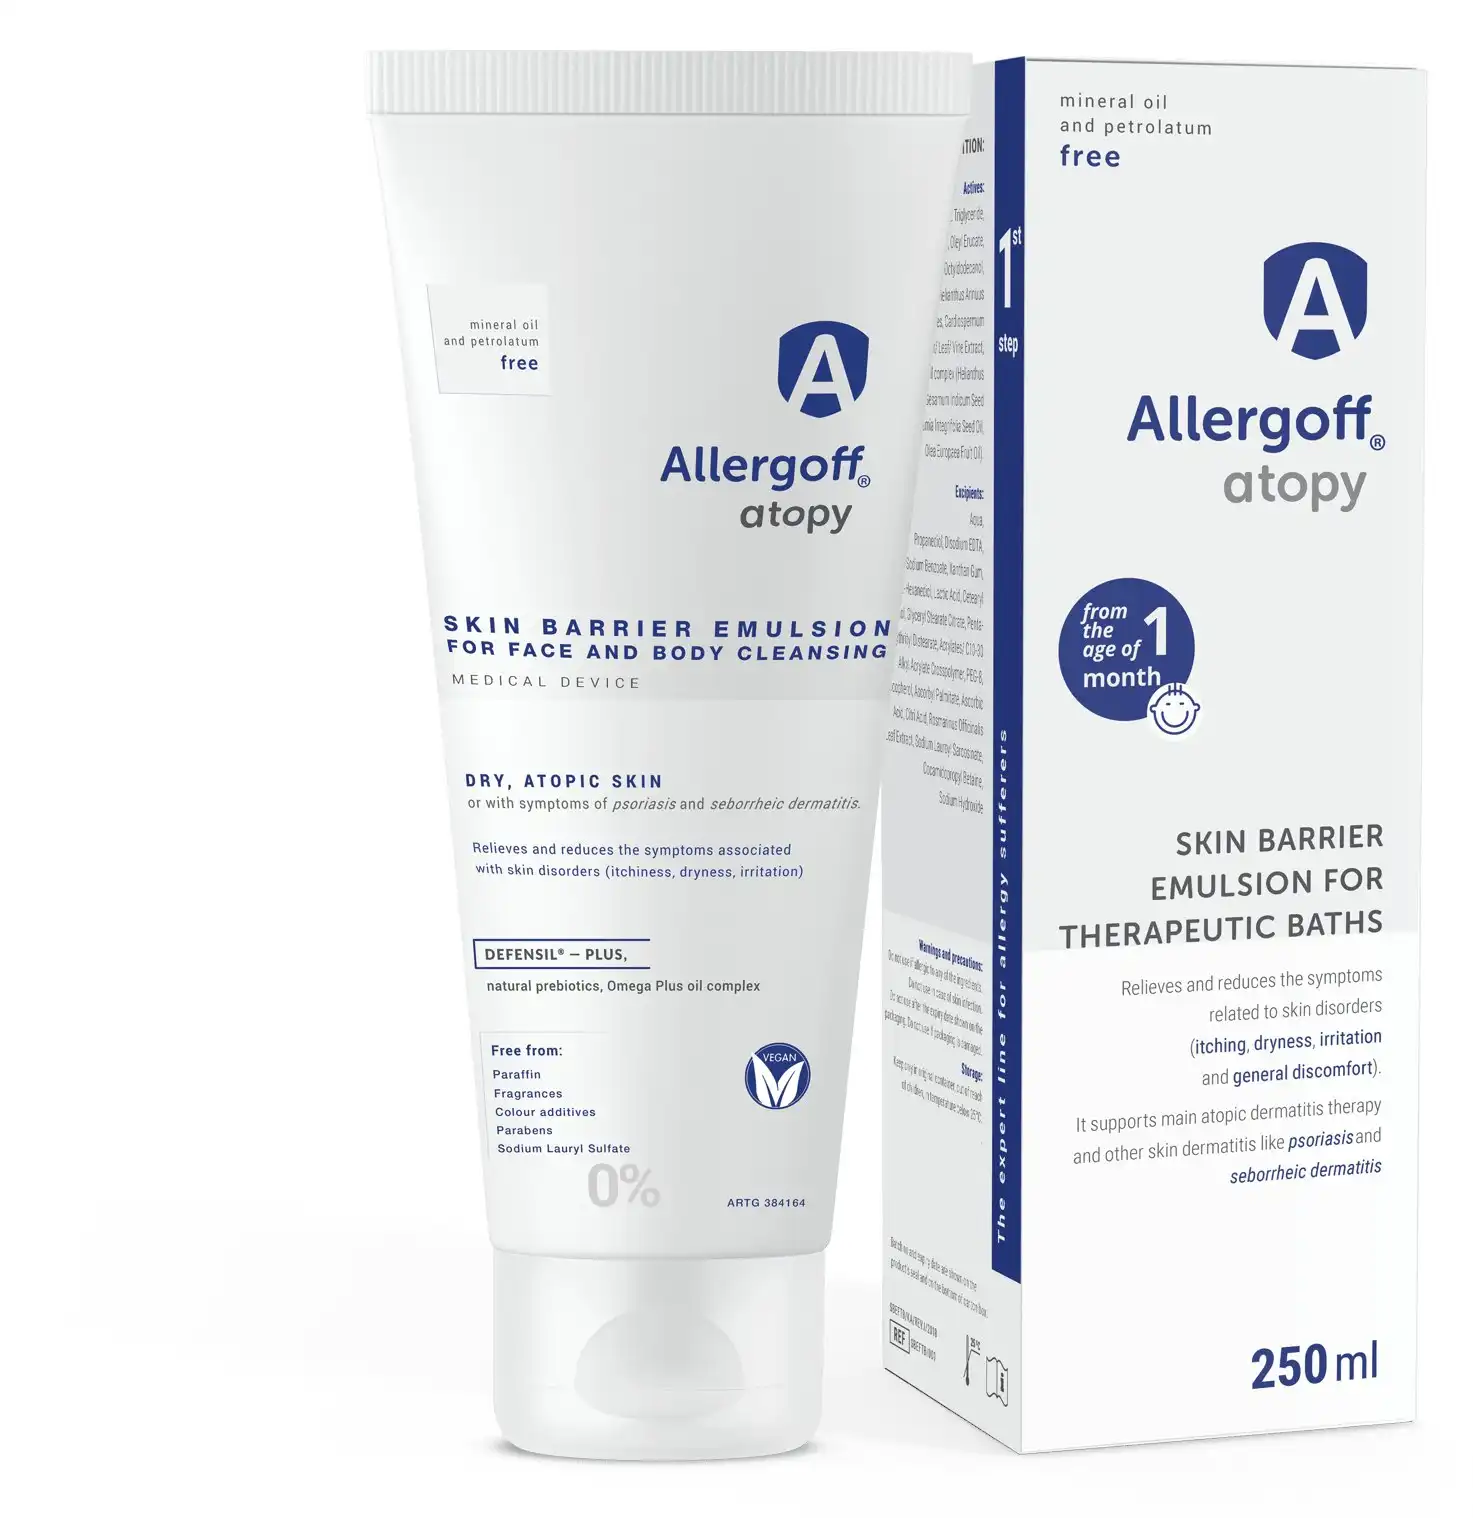 Allergoff Atopy Skin Barrier Emulsion for Gentle Face and Body Cleansing 250ml